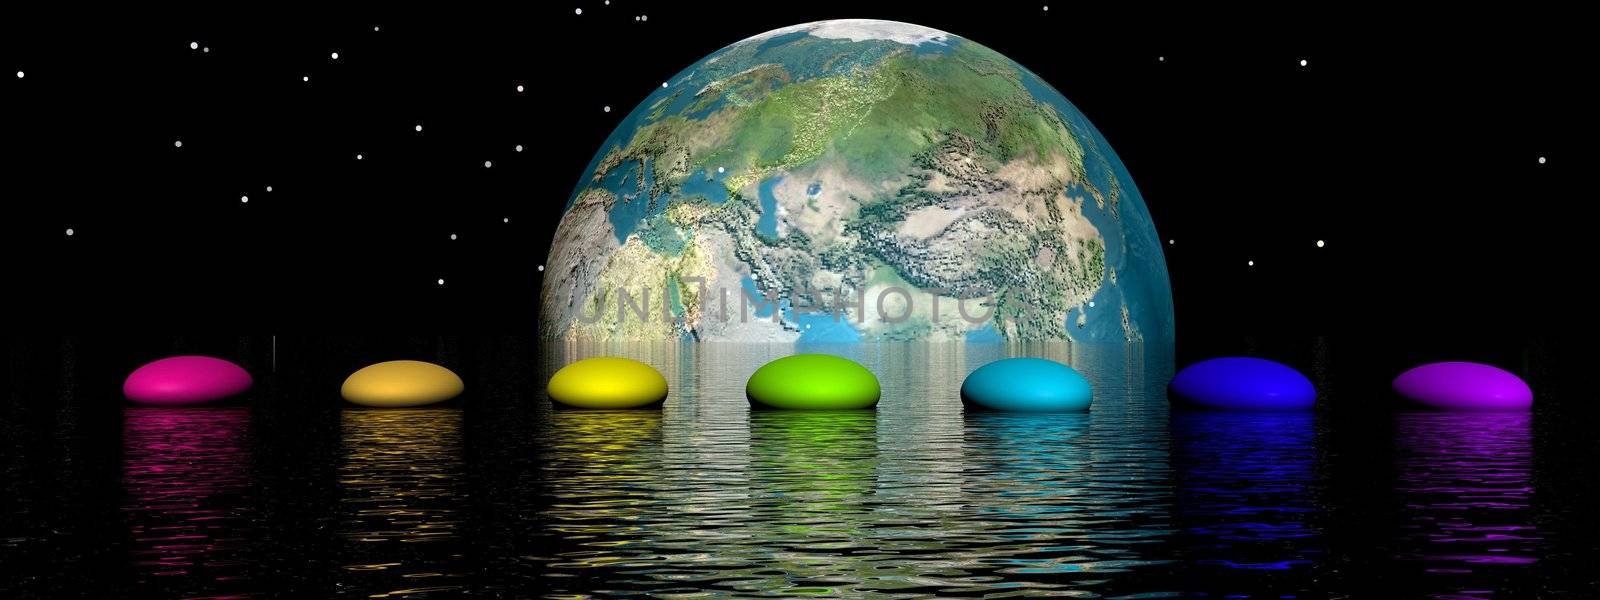 Line of seven pebbles with chakras colors upon the ocean by starry night, in front of earth shadow, horizon in the background